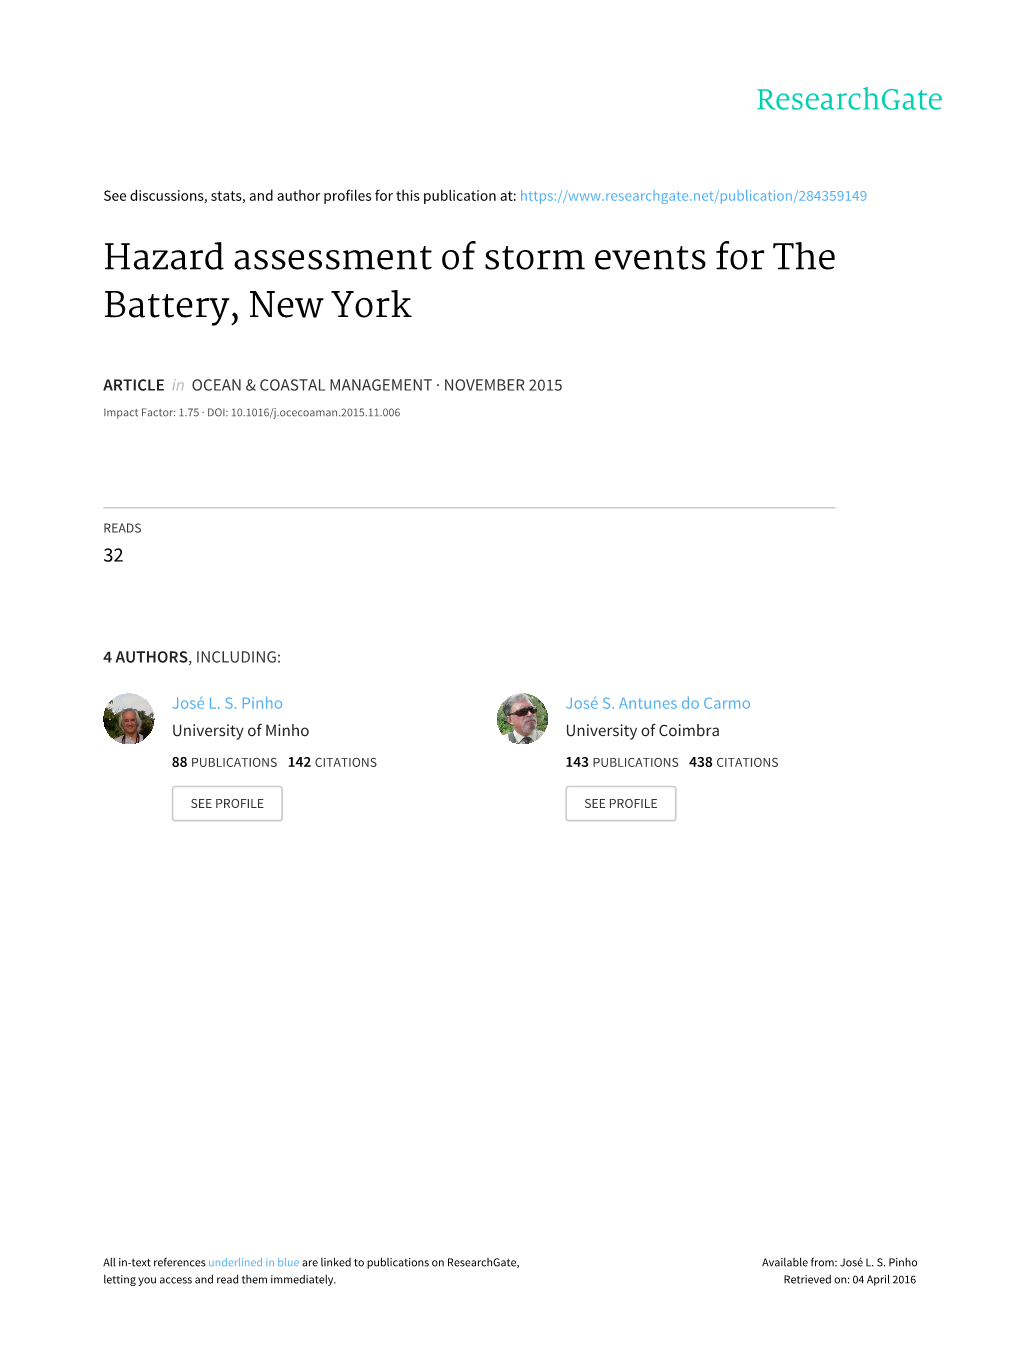 Hazard Assessment of Storm Events for the Battery, New York